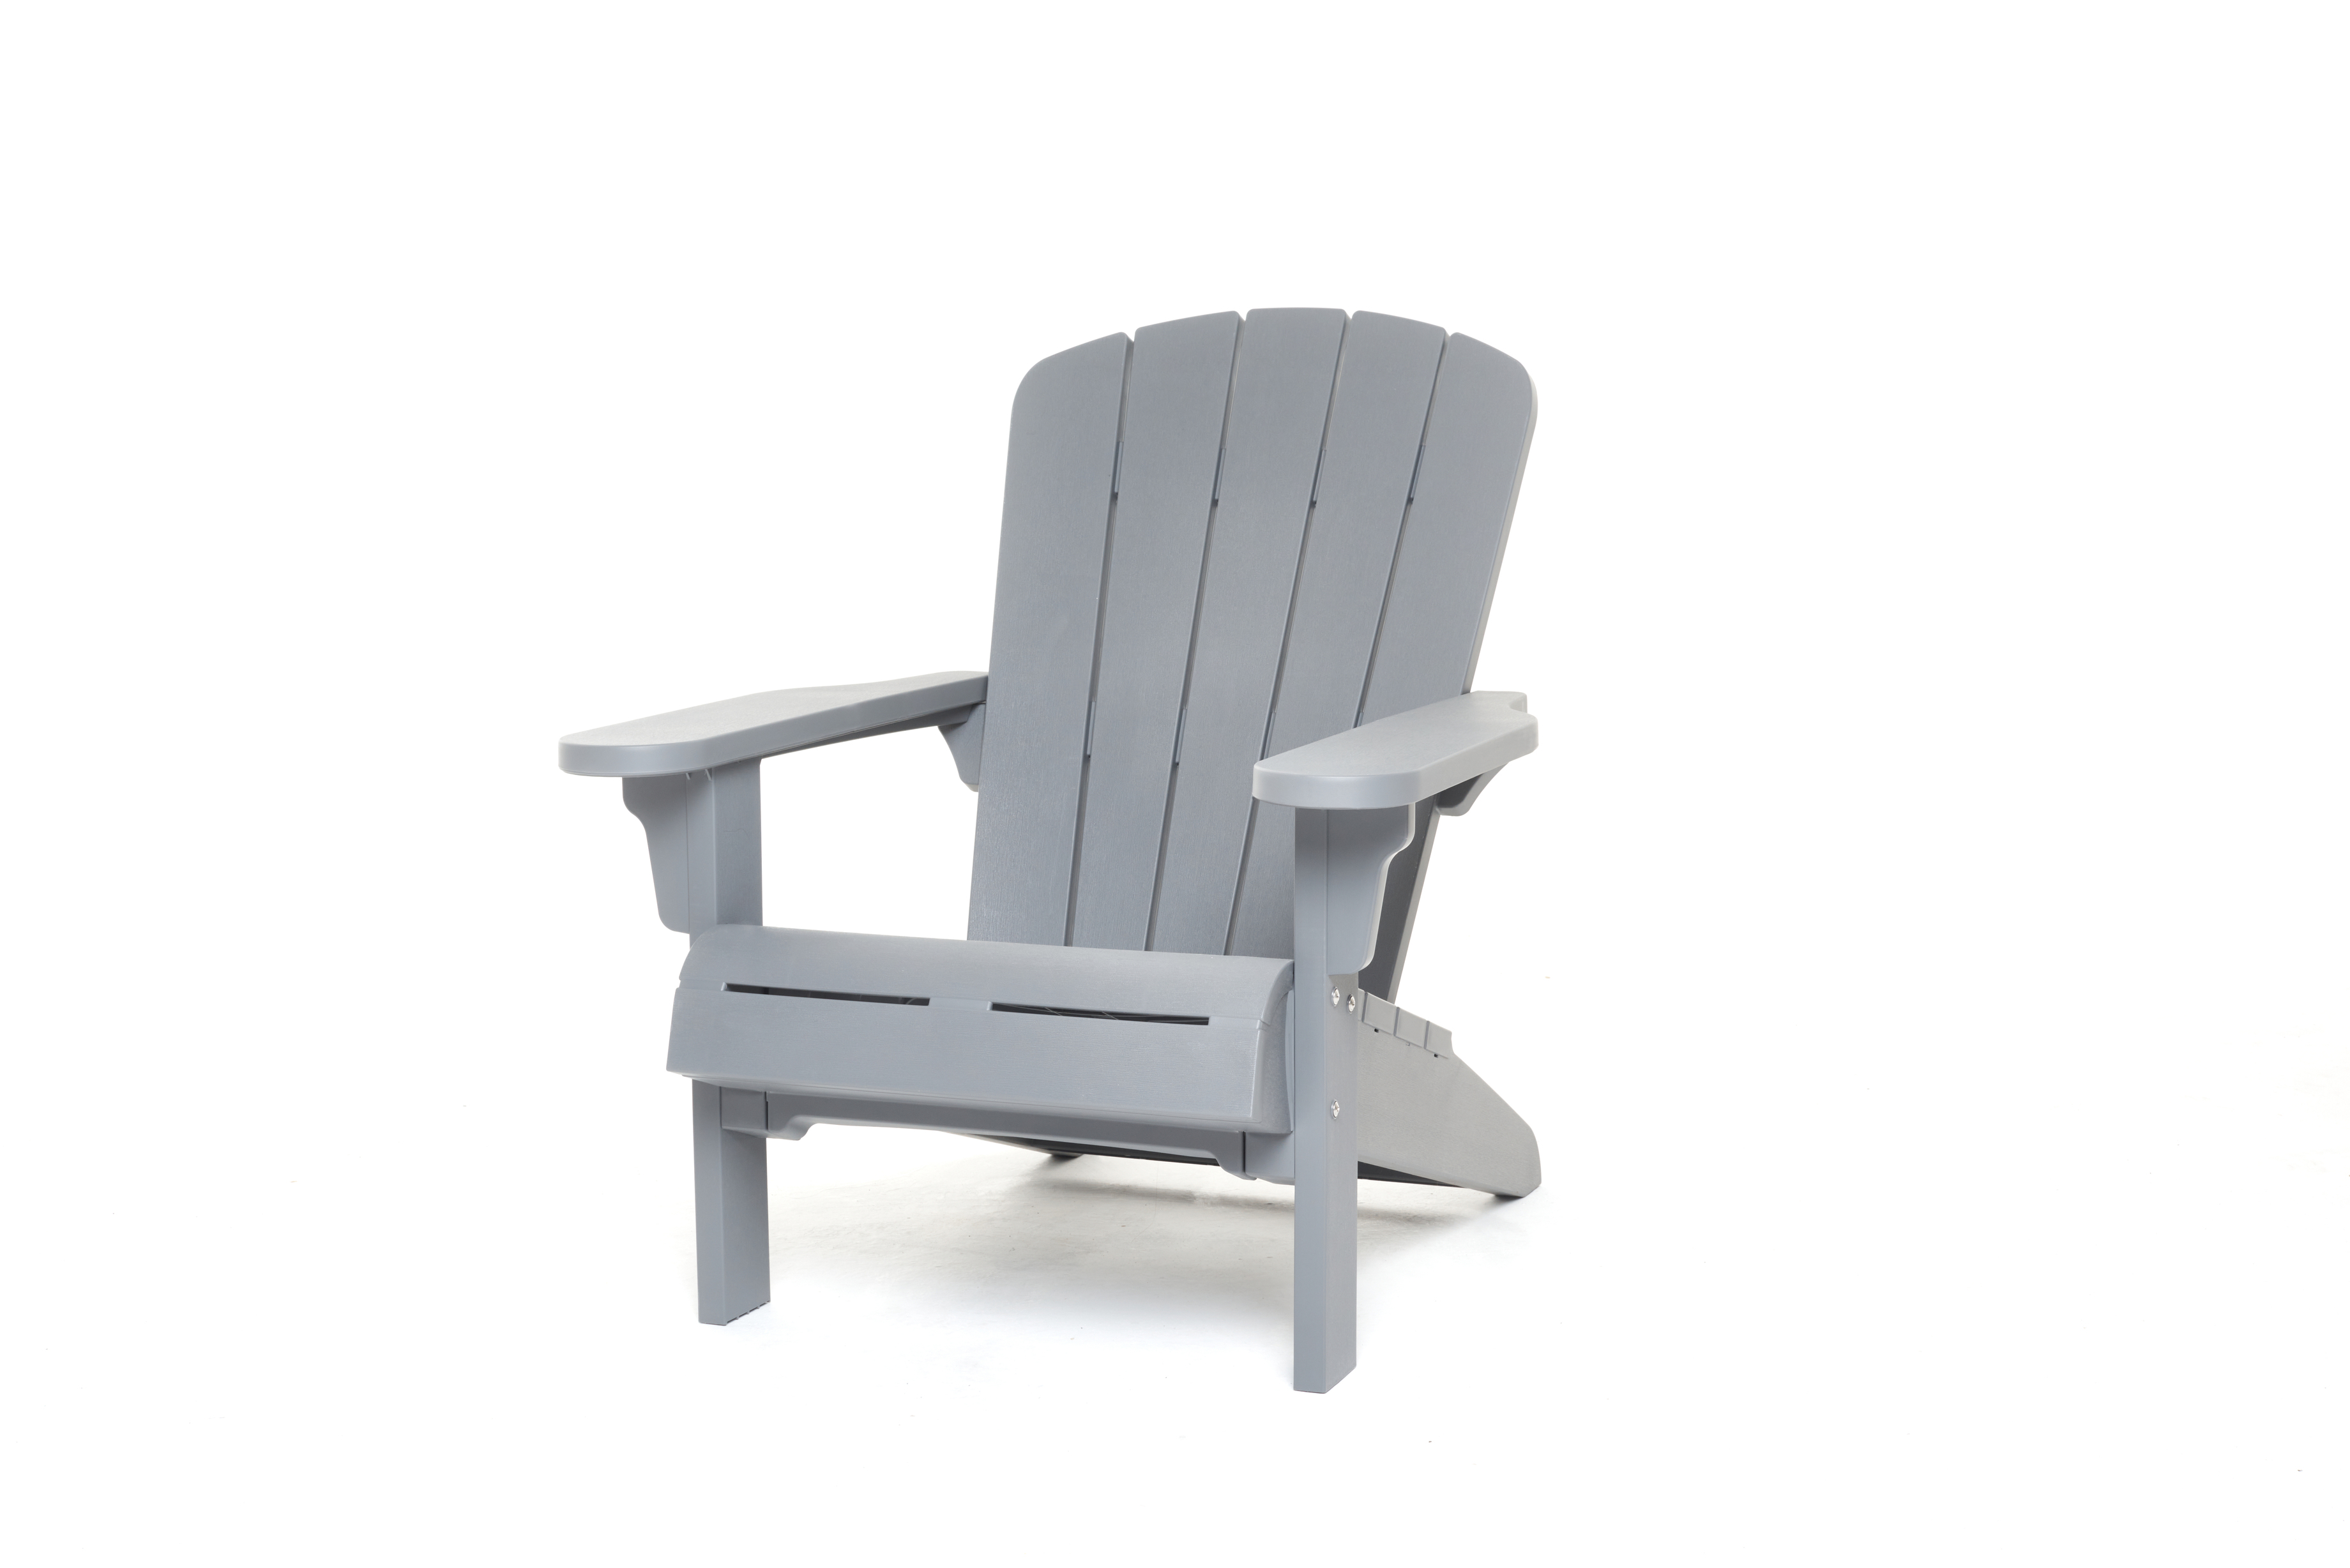 Keter Adirondack Chair, Resin Outdoor Furniture, Gray - image 1 of 7